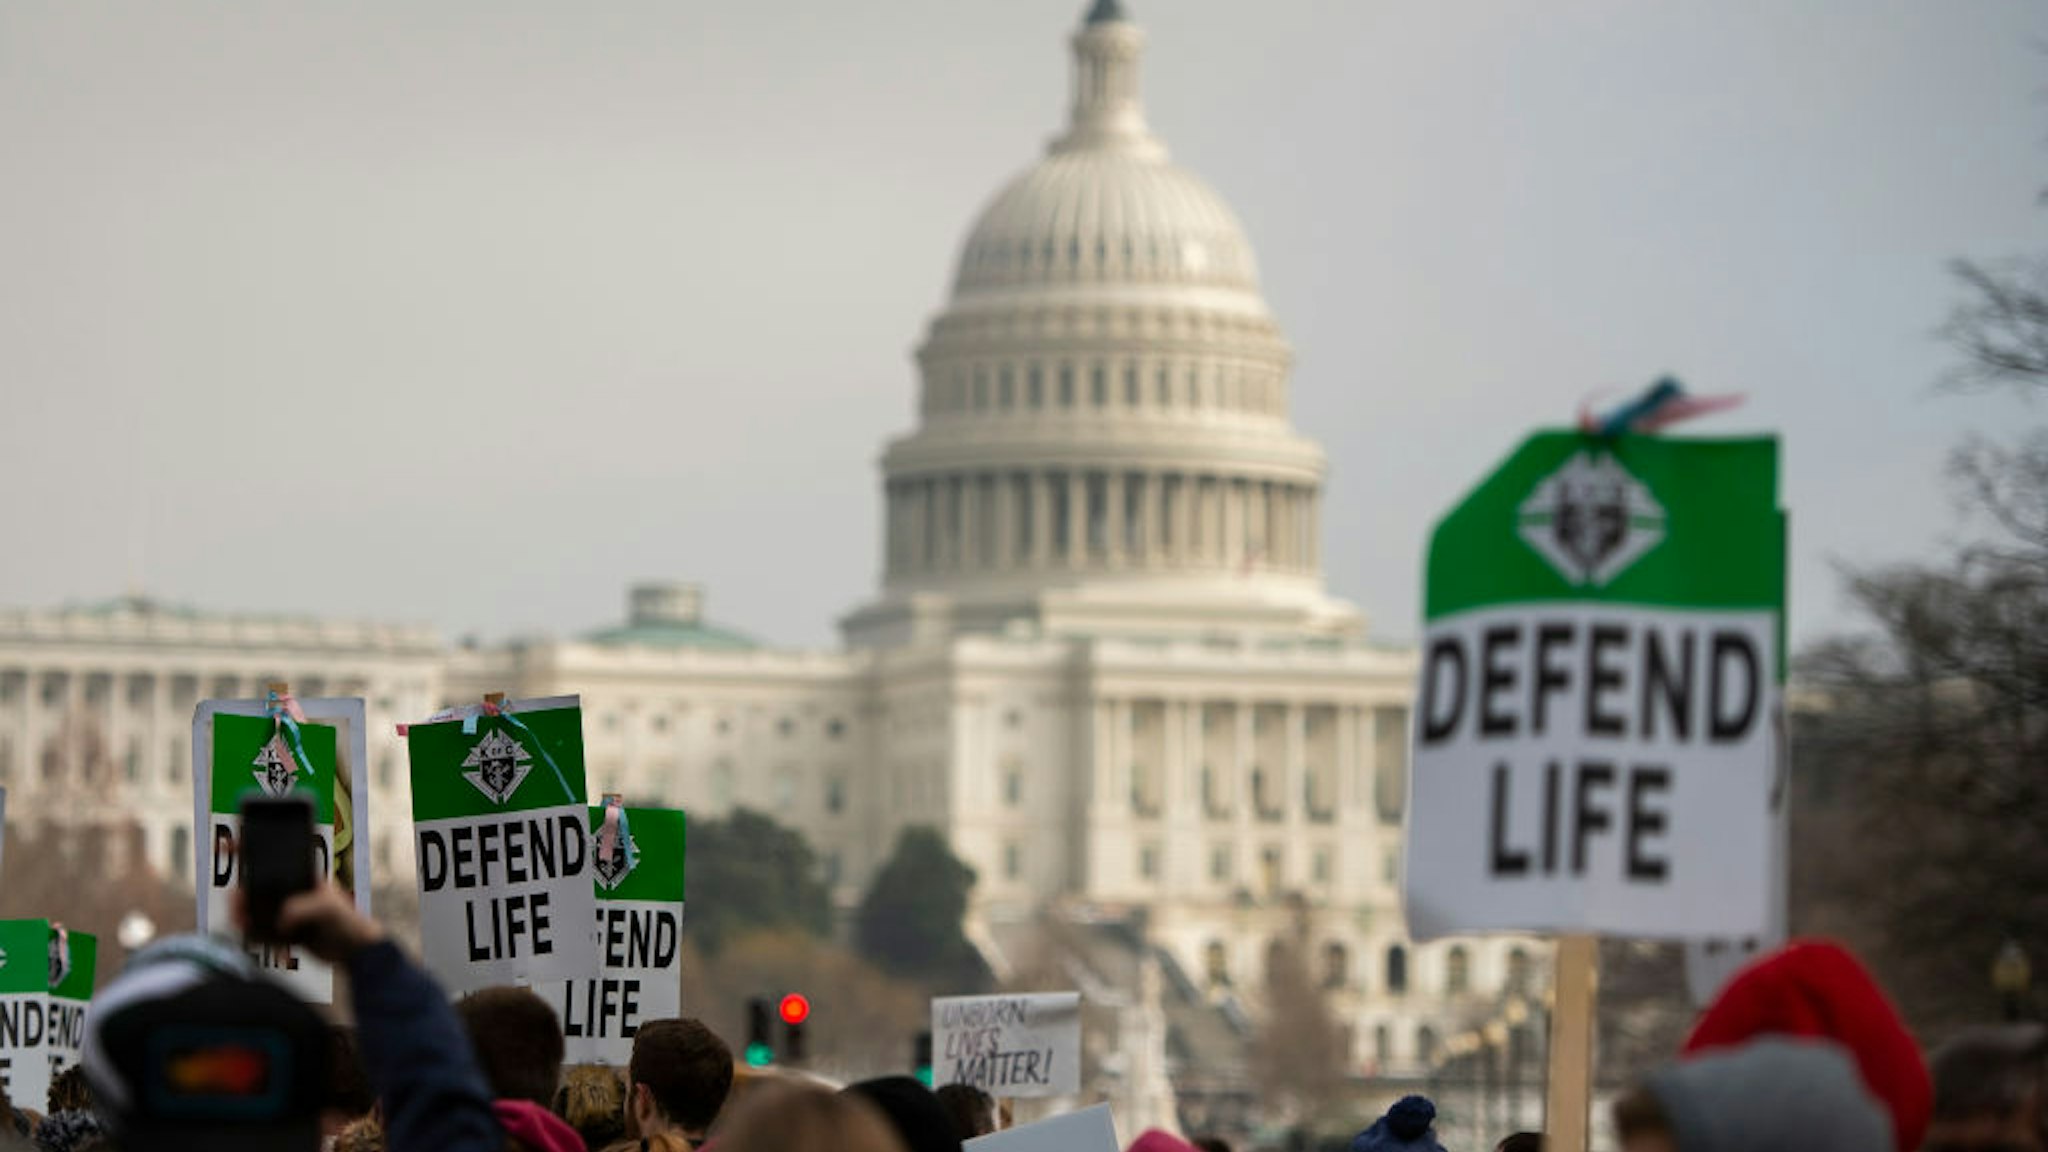 Students and activists carry signs during the annual "March for Life" in Washington, DC on January 18, 2019.